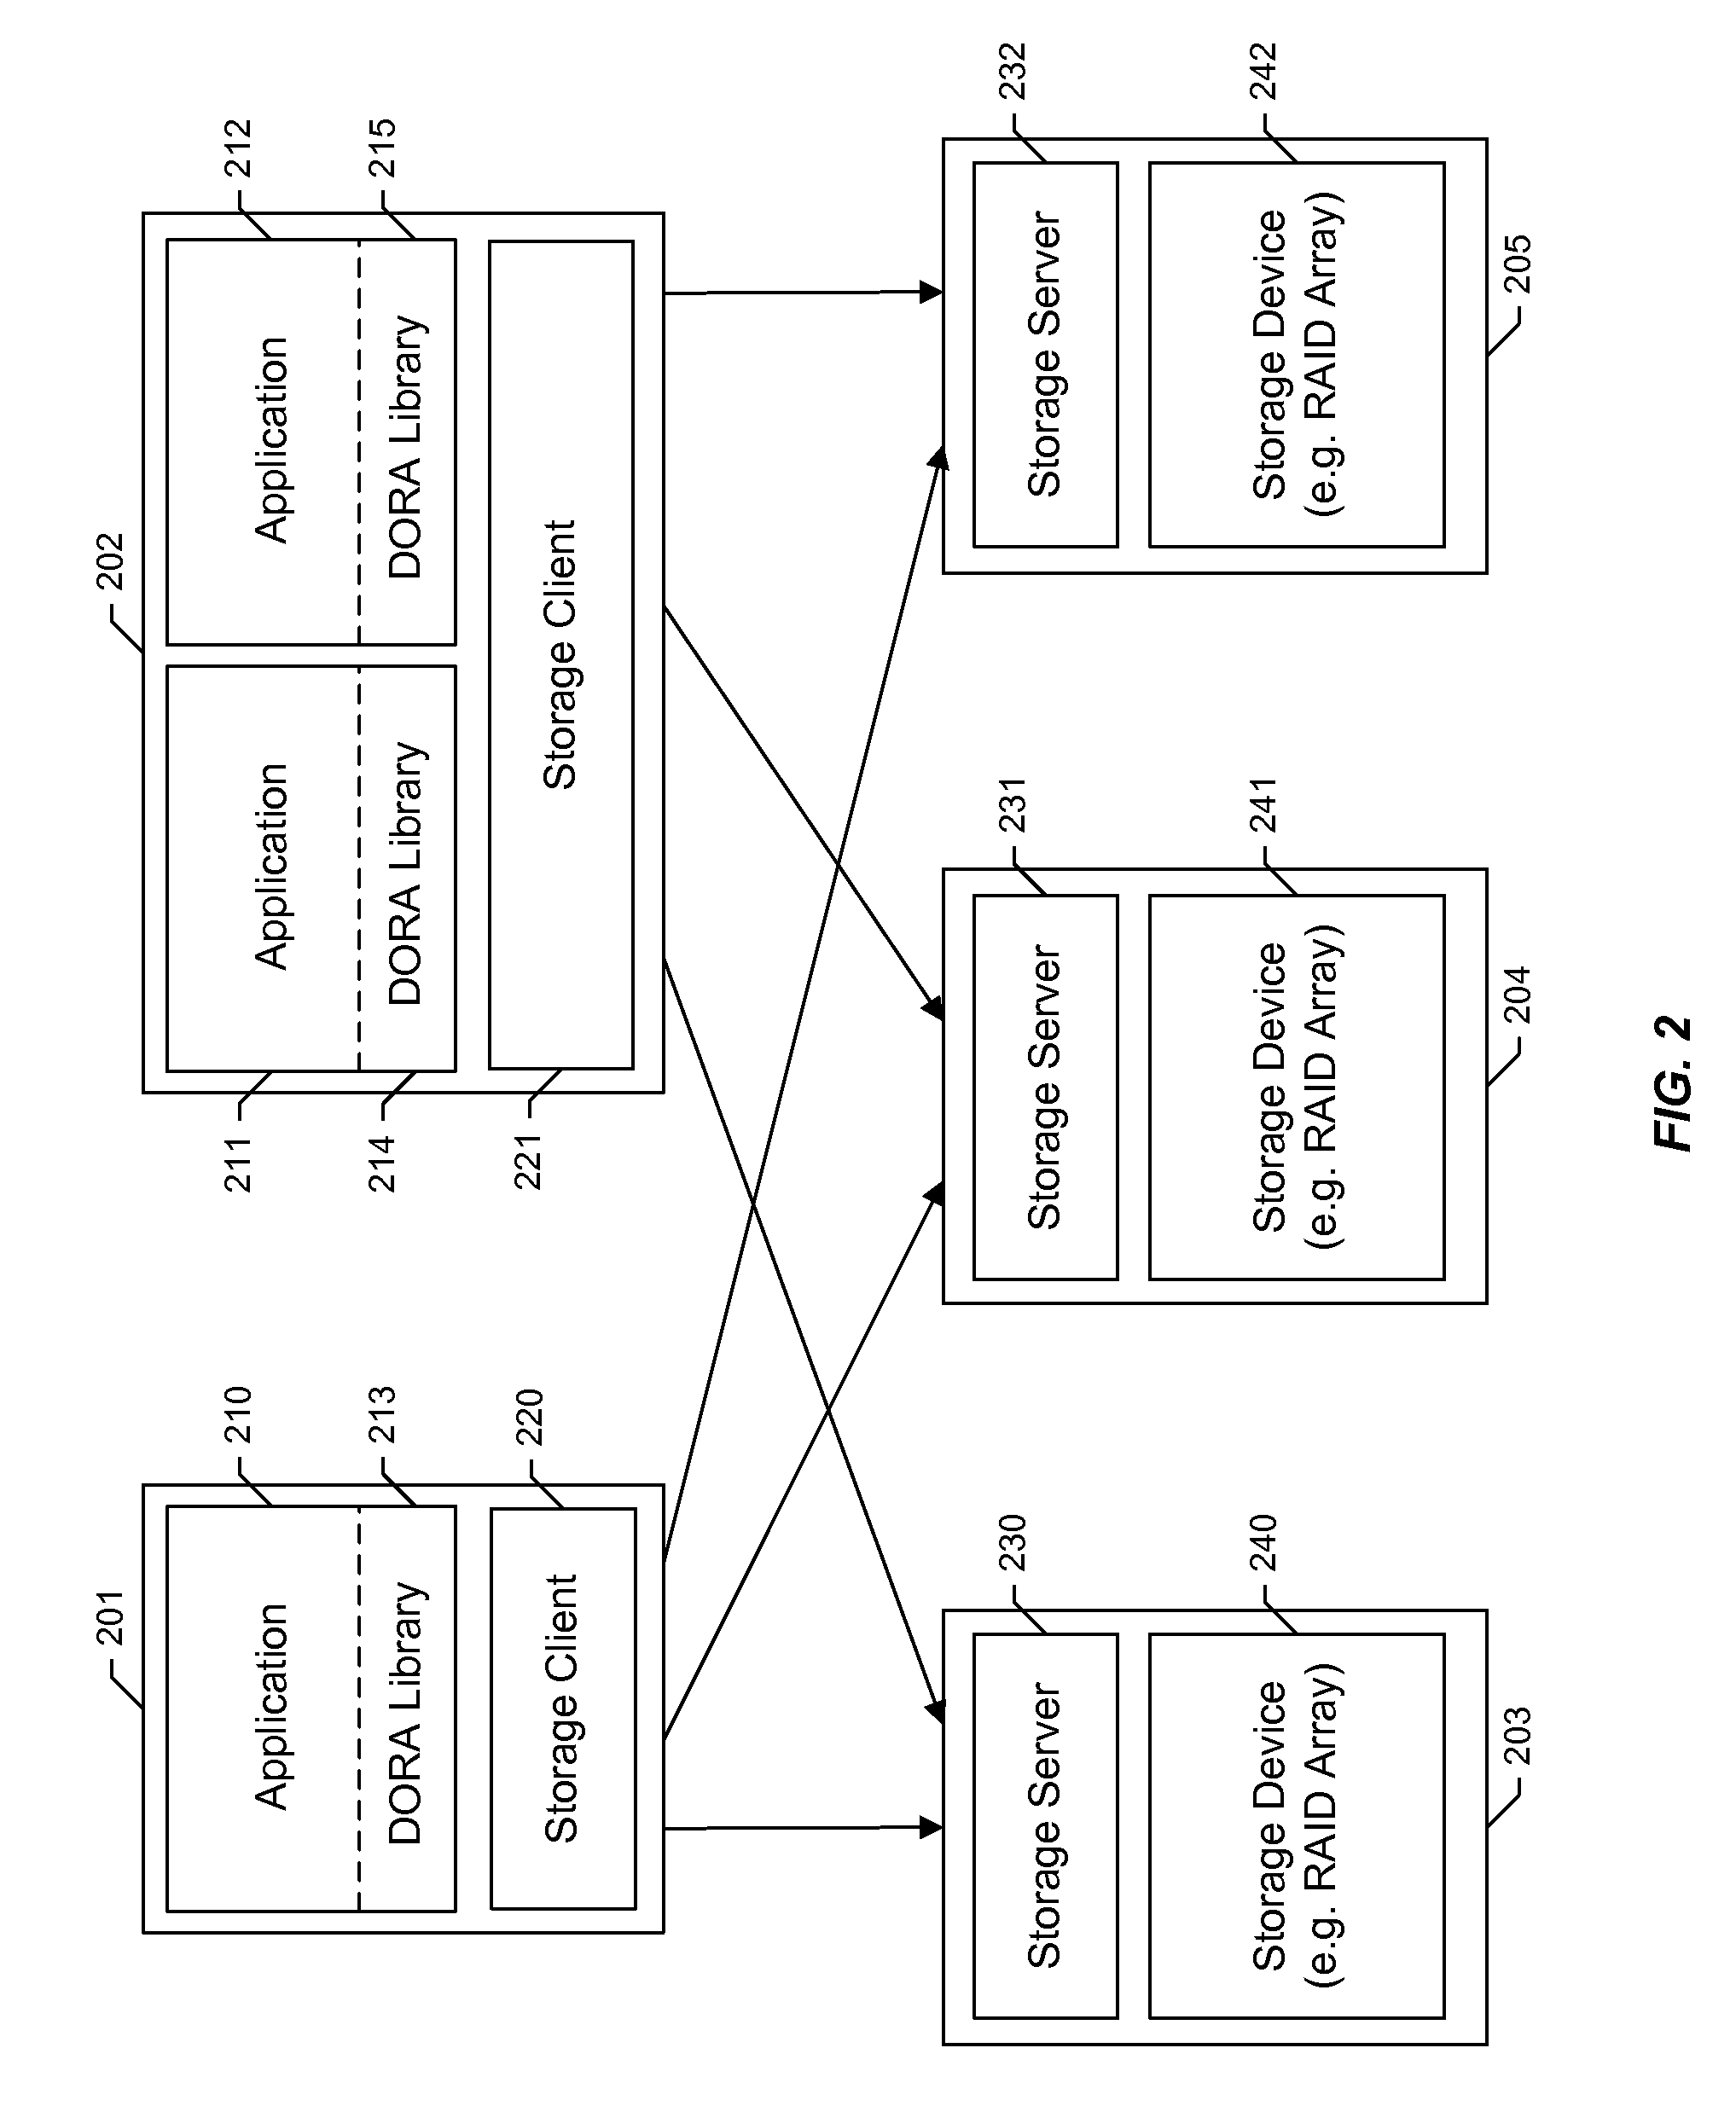 Method for distributed direct object access storage